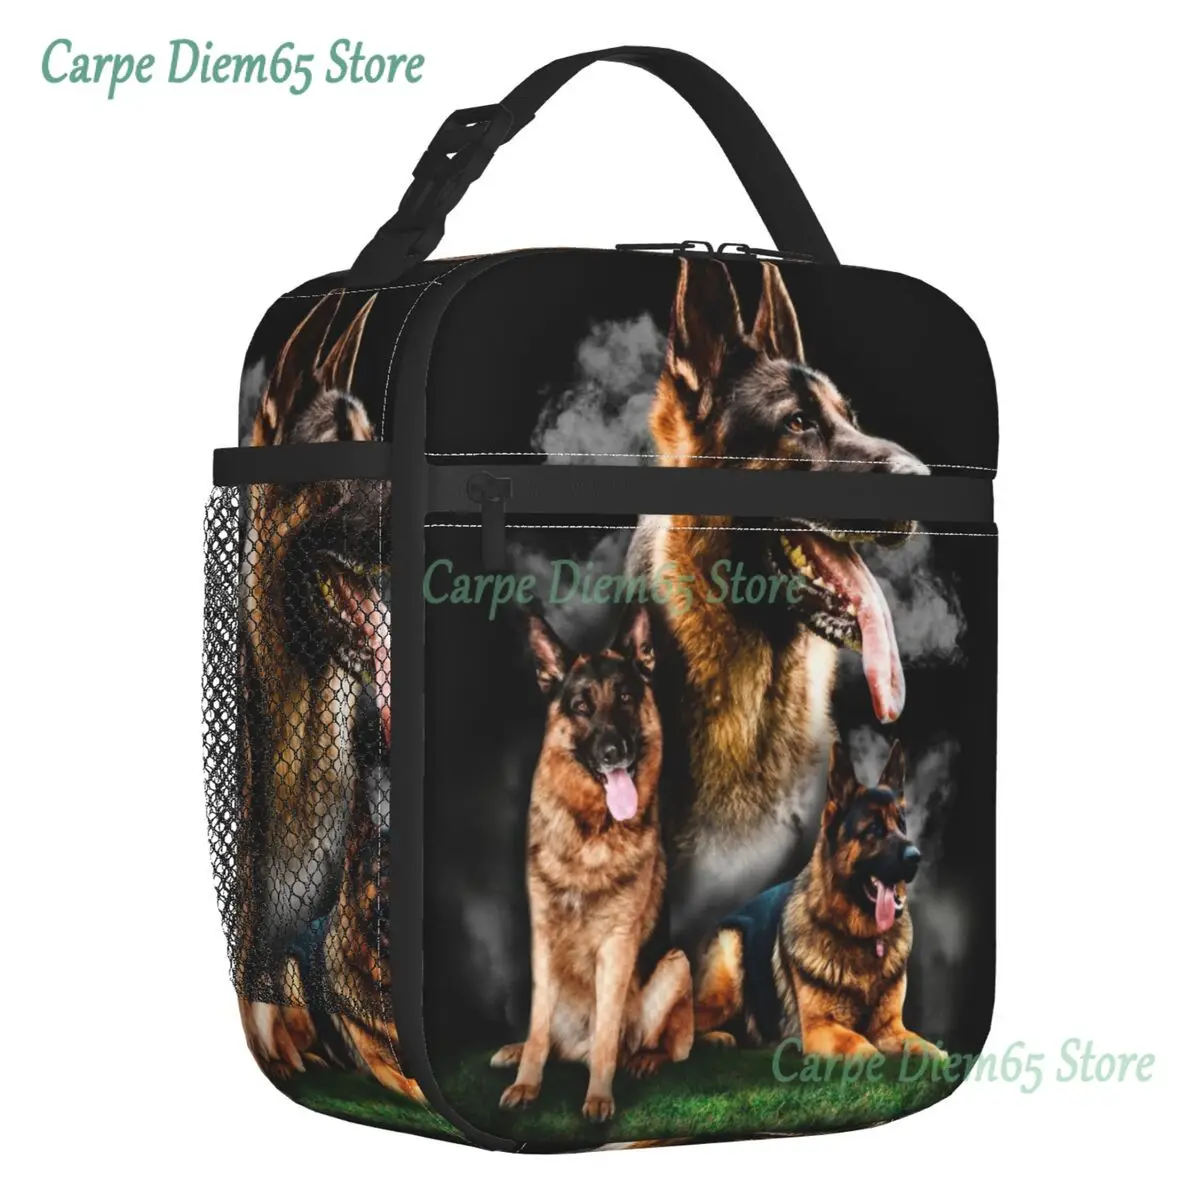 

German Shepherd Dog Insulated Lunch Bag for Women Portable GSD Animal Wolf Dog Thermal Cooler Lunch Tote Kids School Children